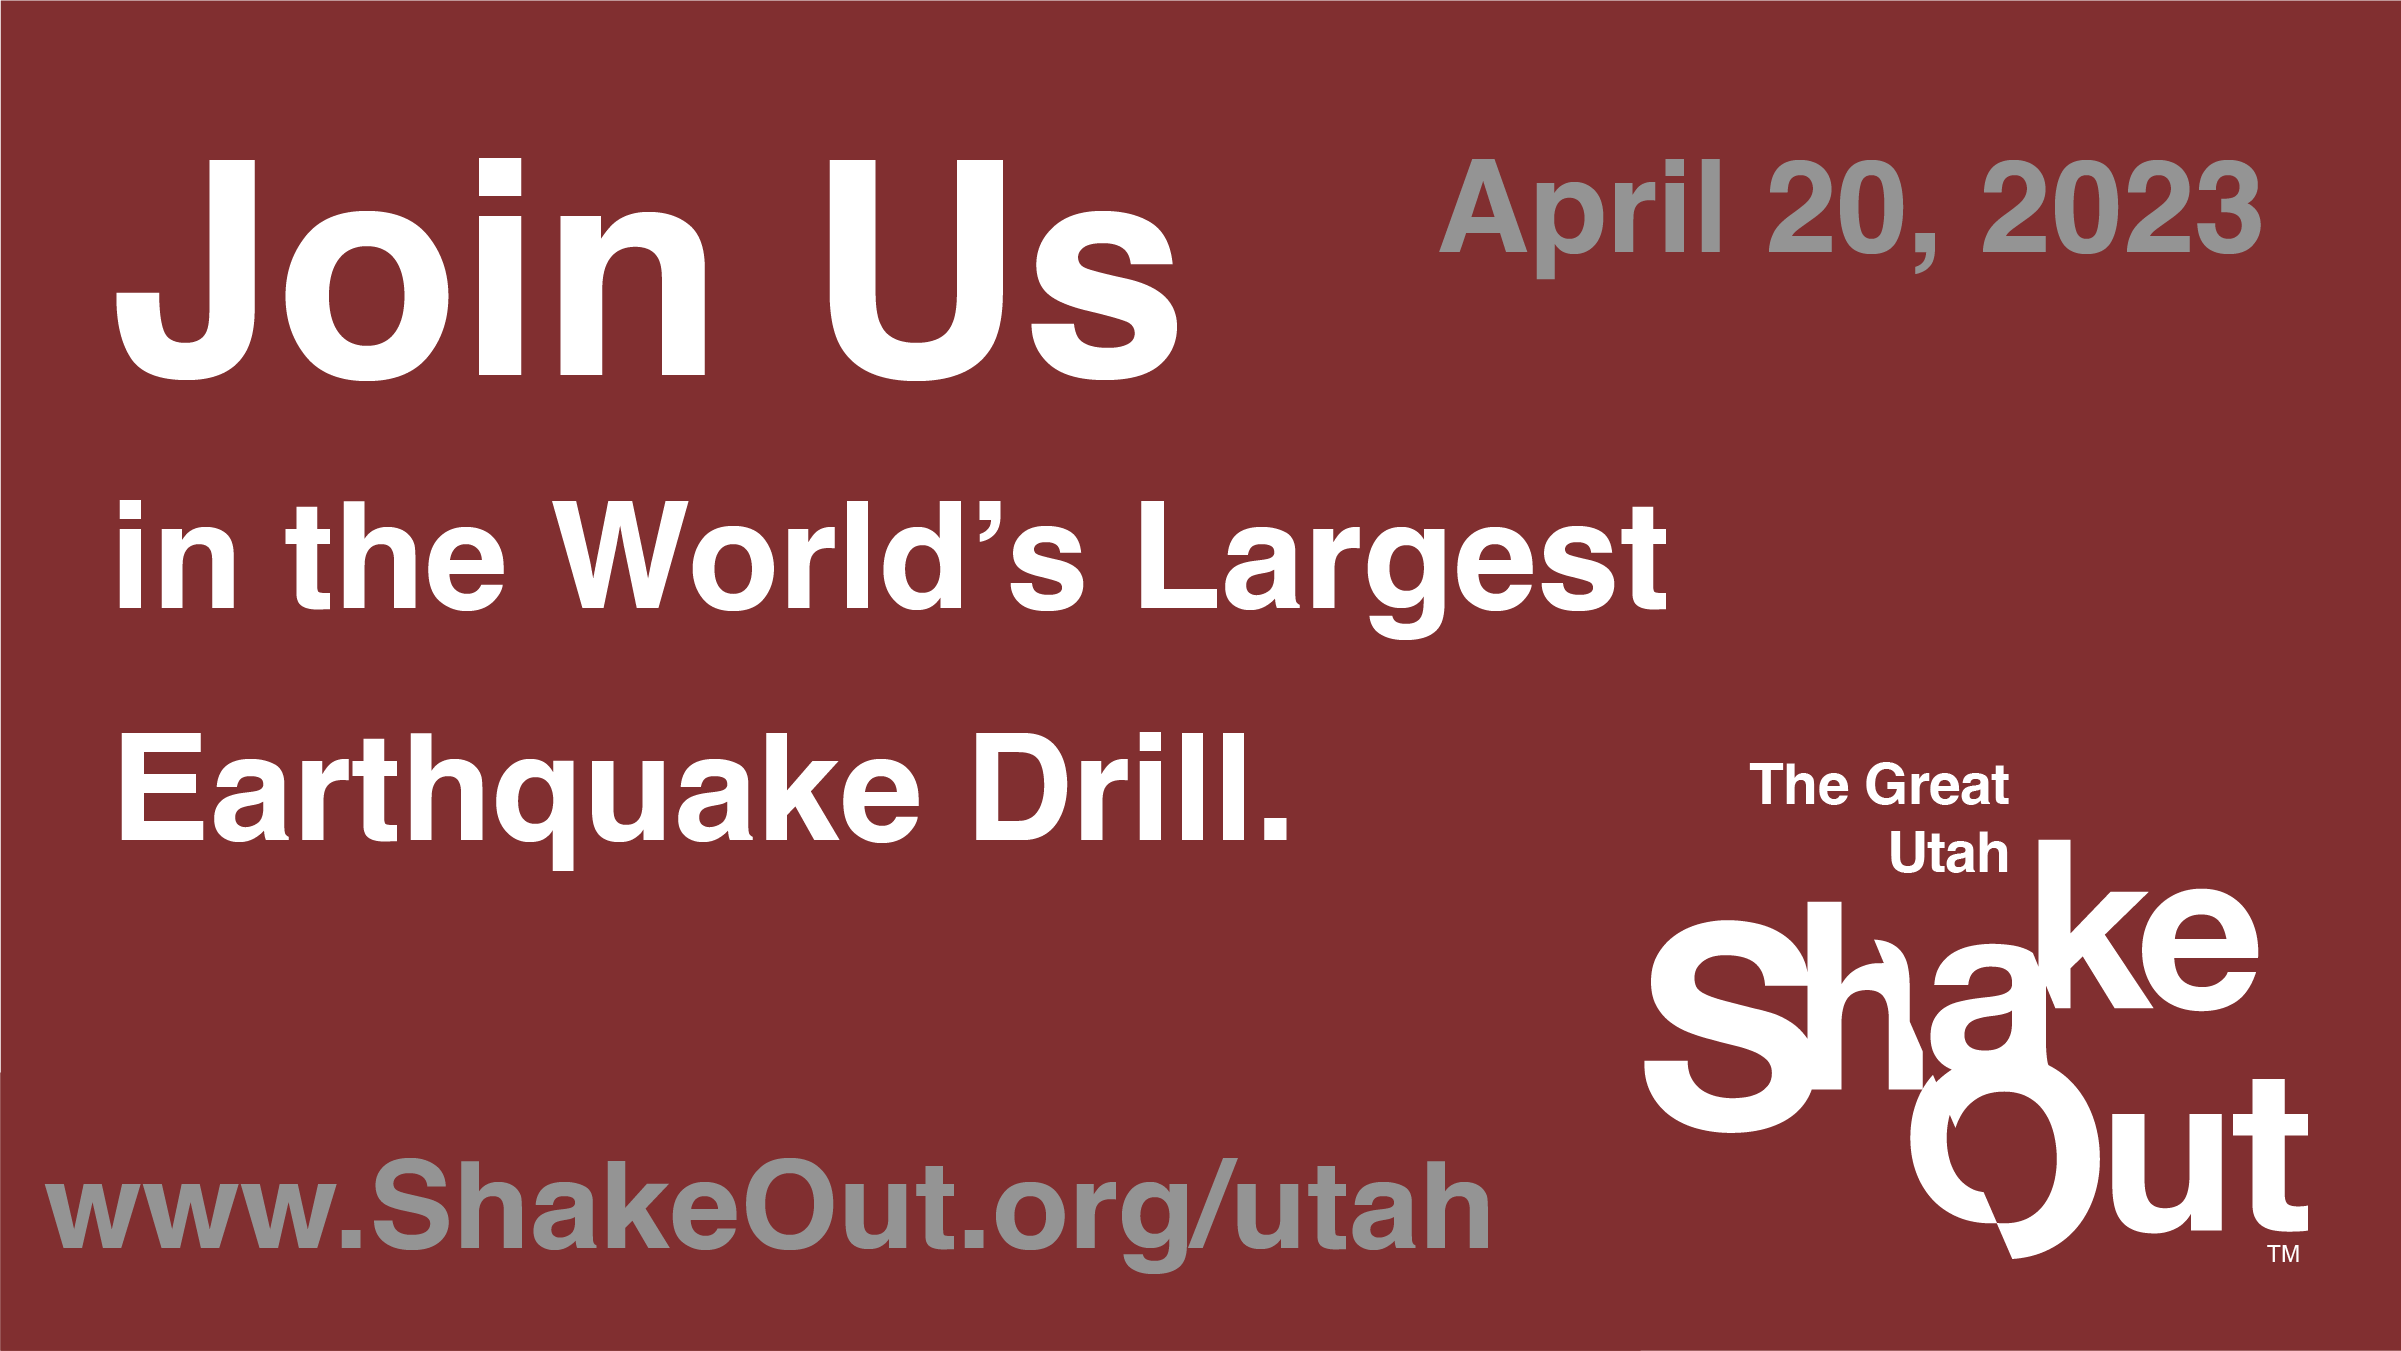 ShakeOut: Join Us (Twitter)